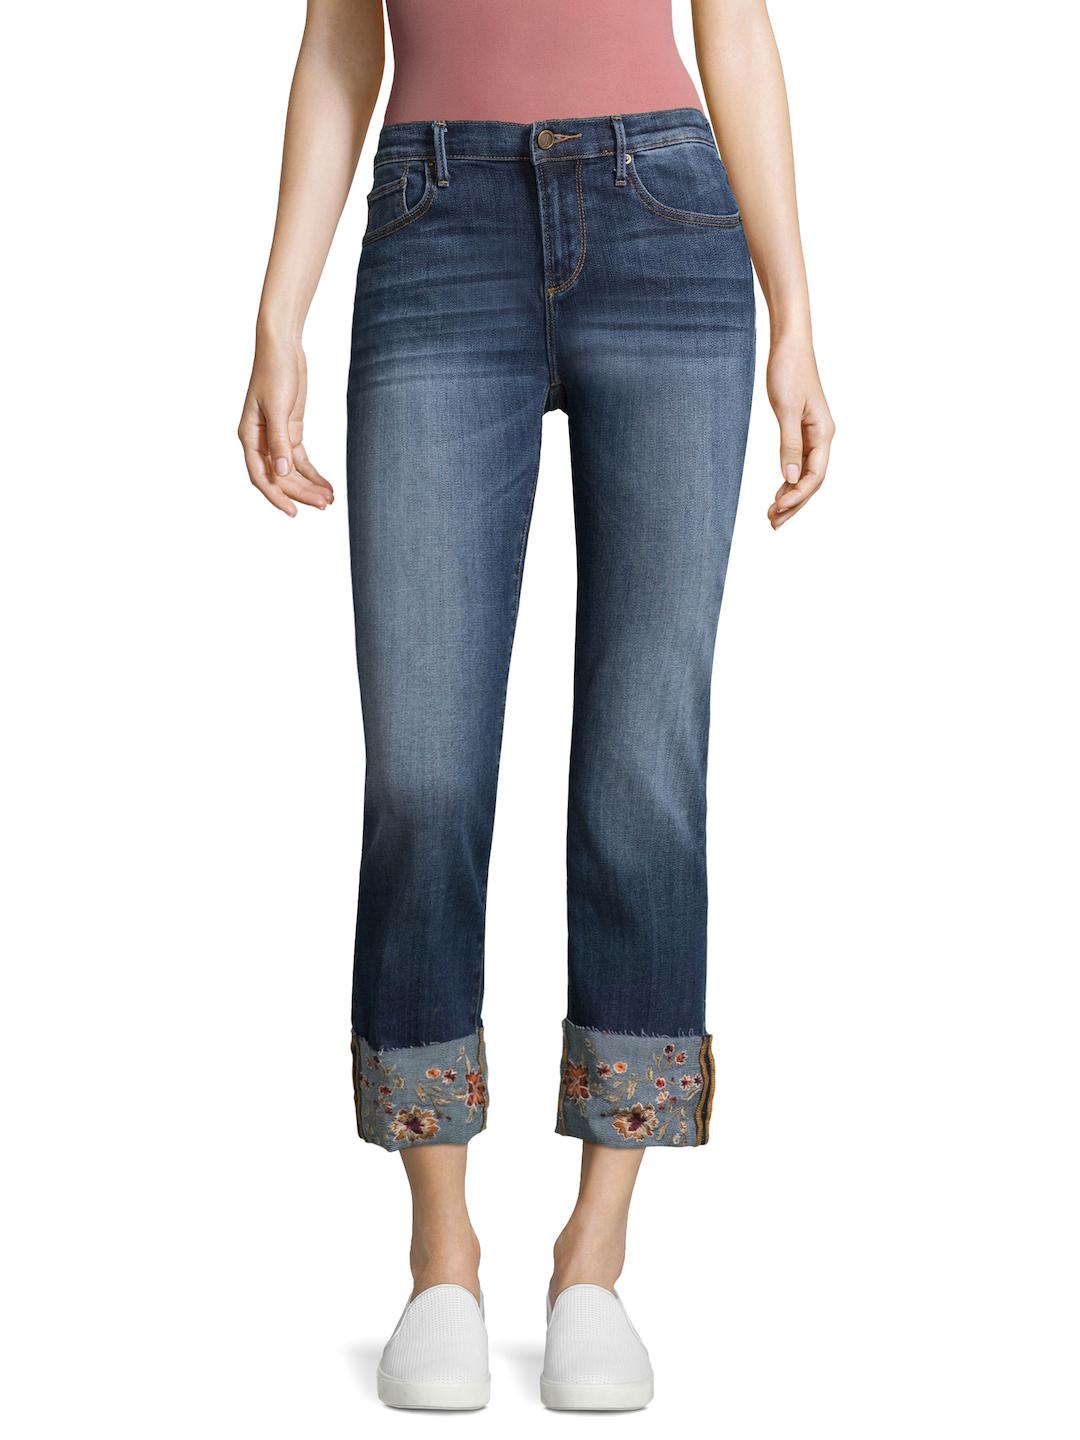 Driftwood Jeans Colette Online, 57% OFF | www.sushithaionline.com